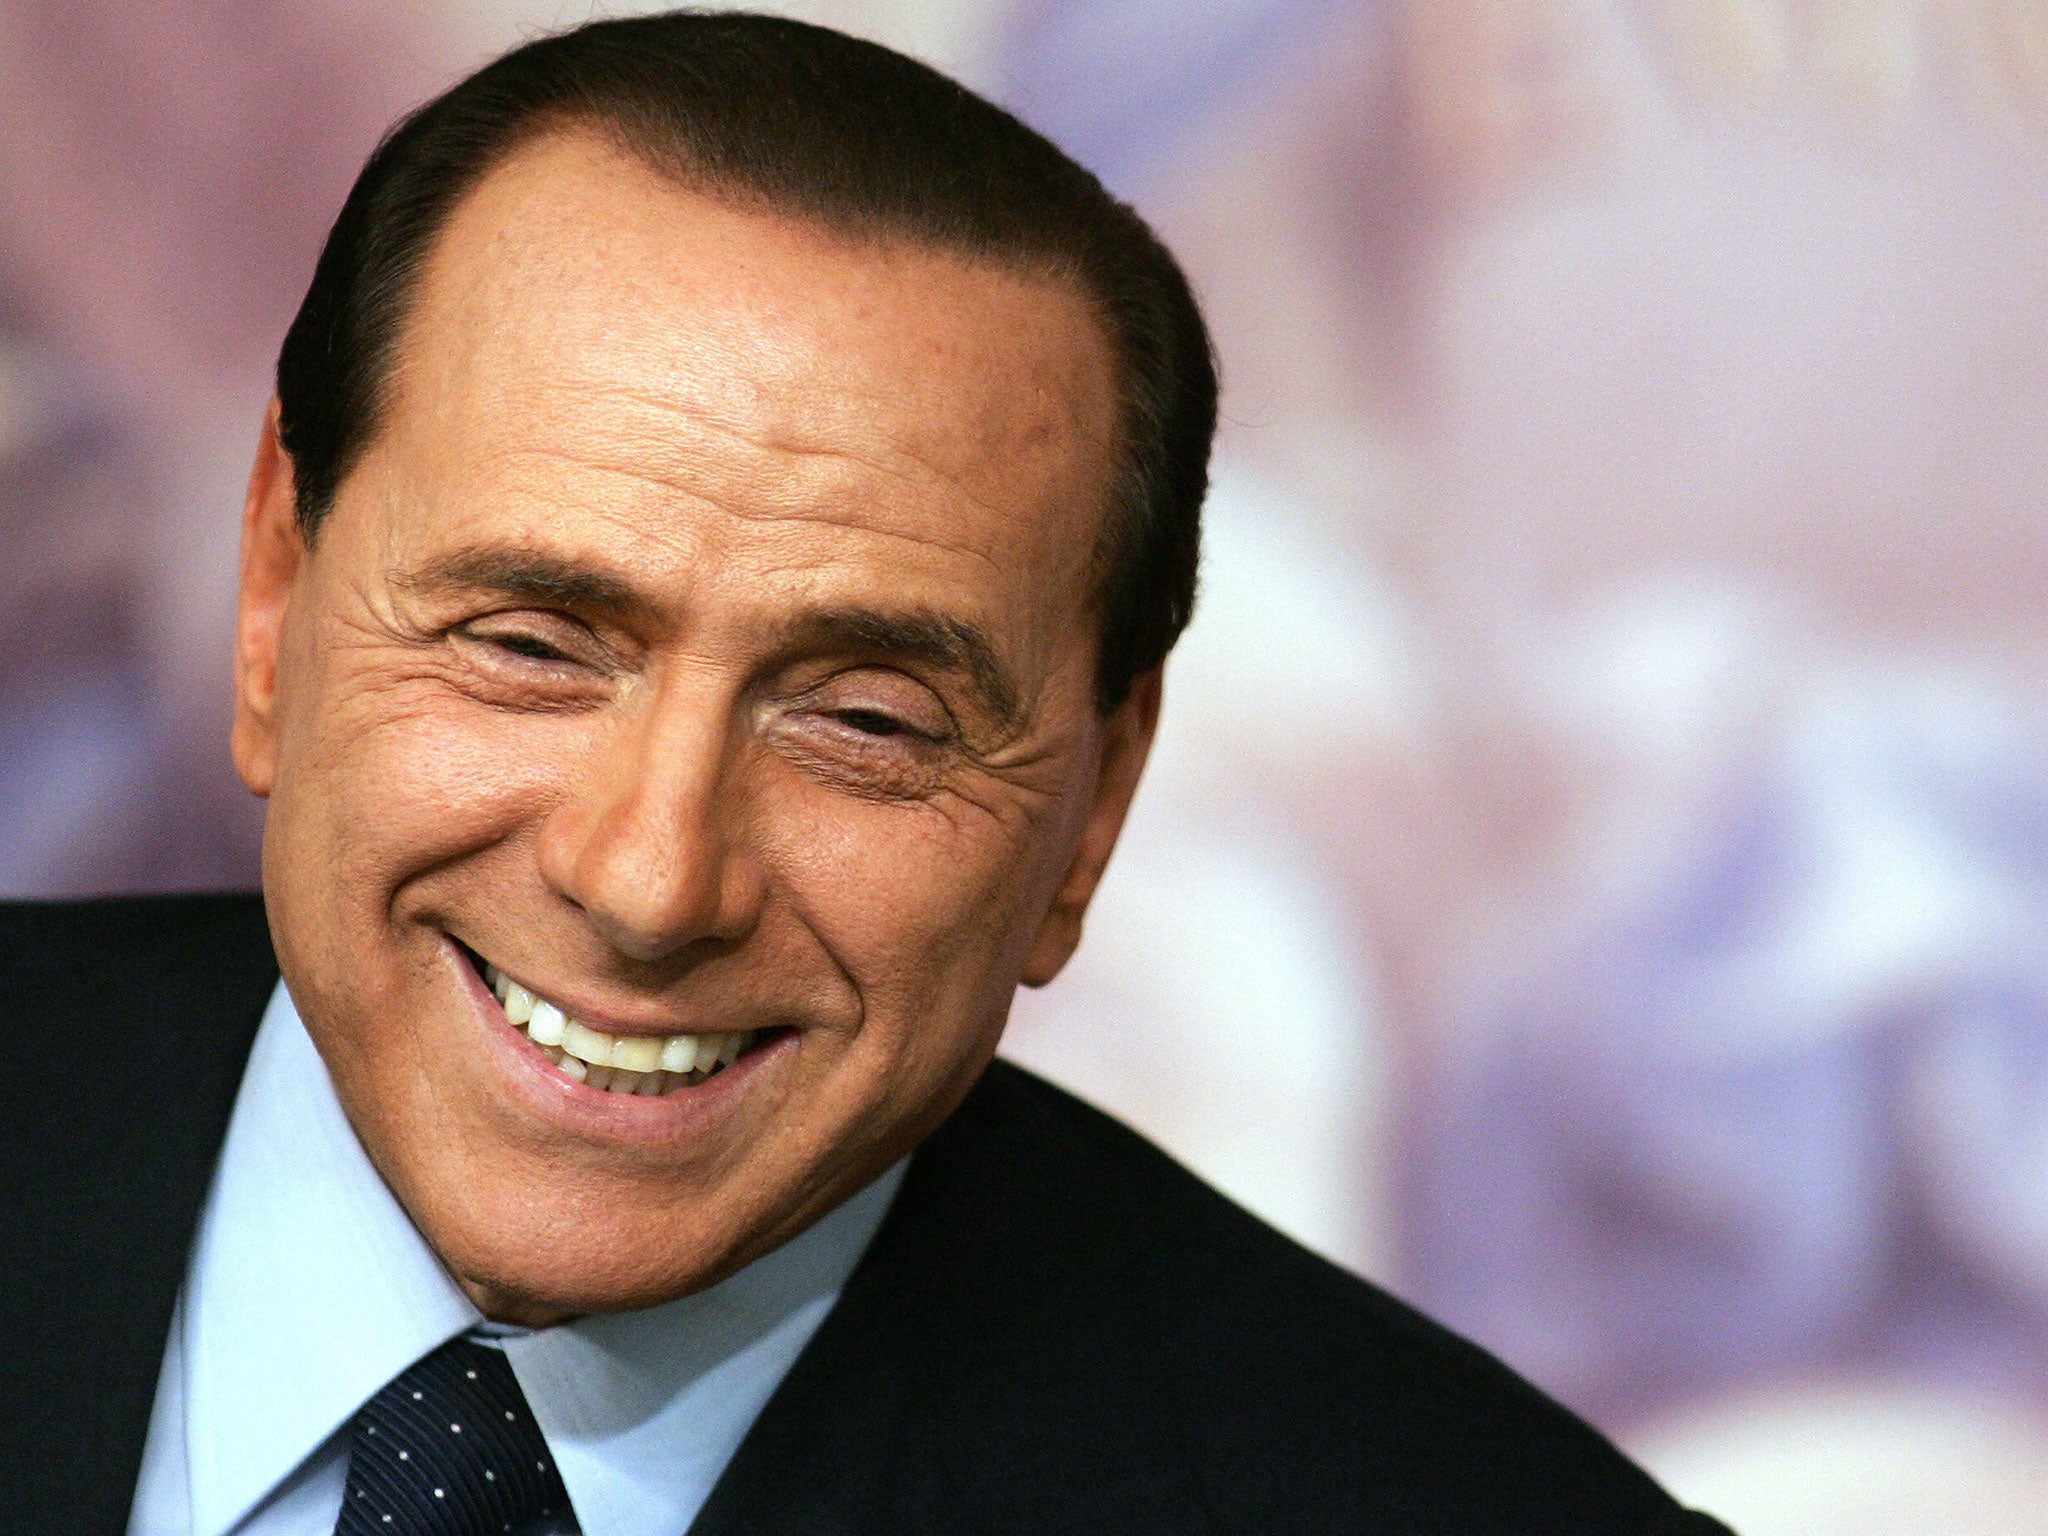 Former Italian PM Silvio Berlusconi was convicted of tax fraud in 2013 and paying for sex with an underage prostitute